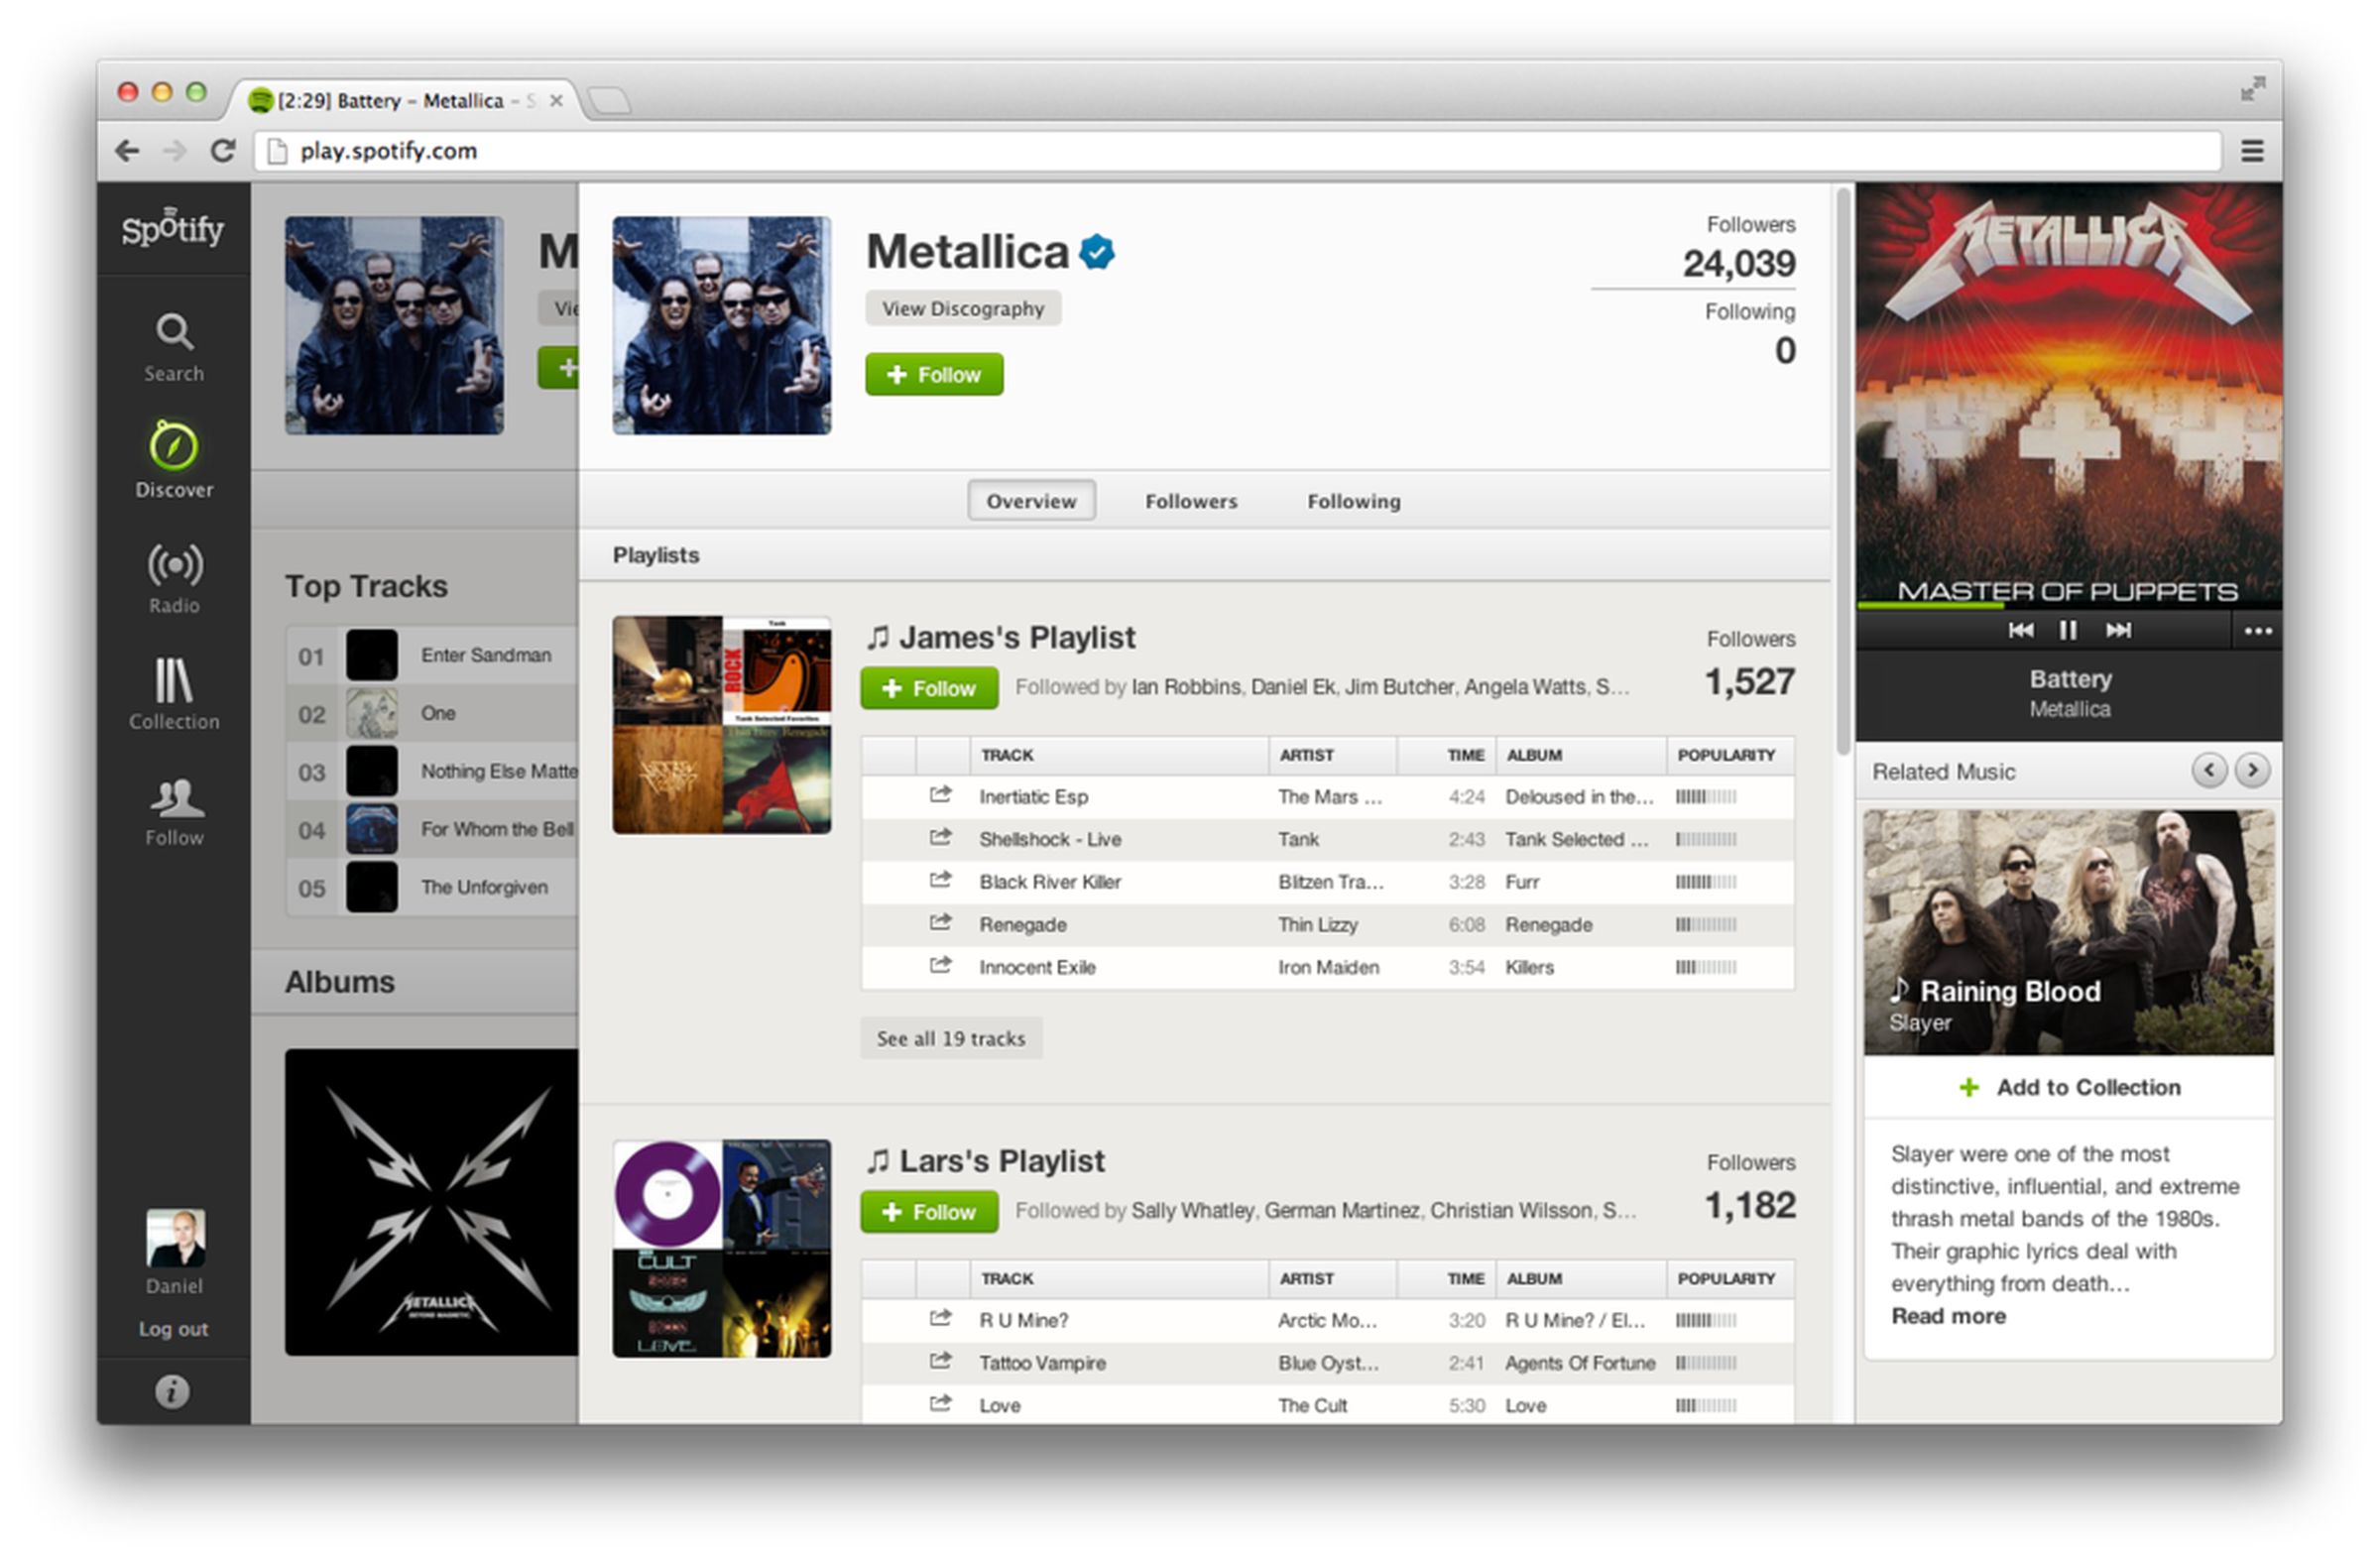 Spotify Discover, Collection, and Follow screenshots